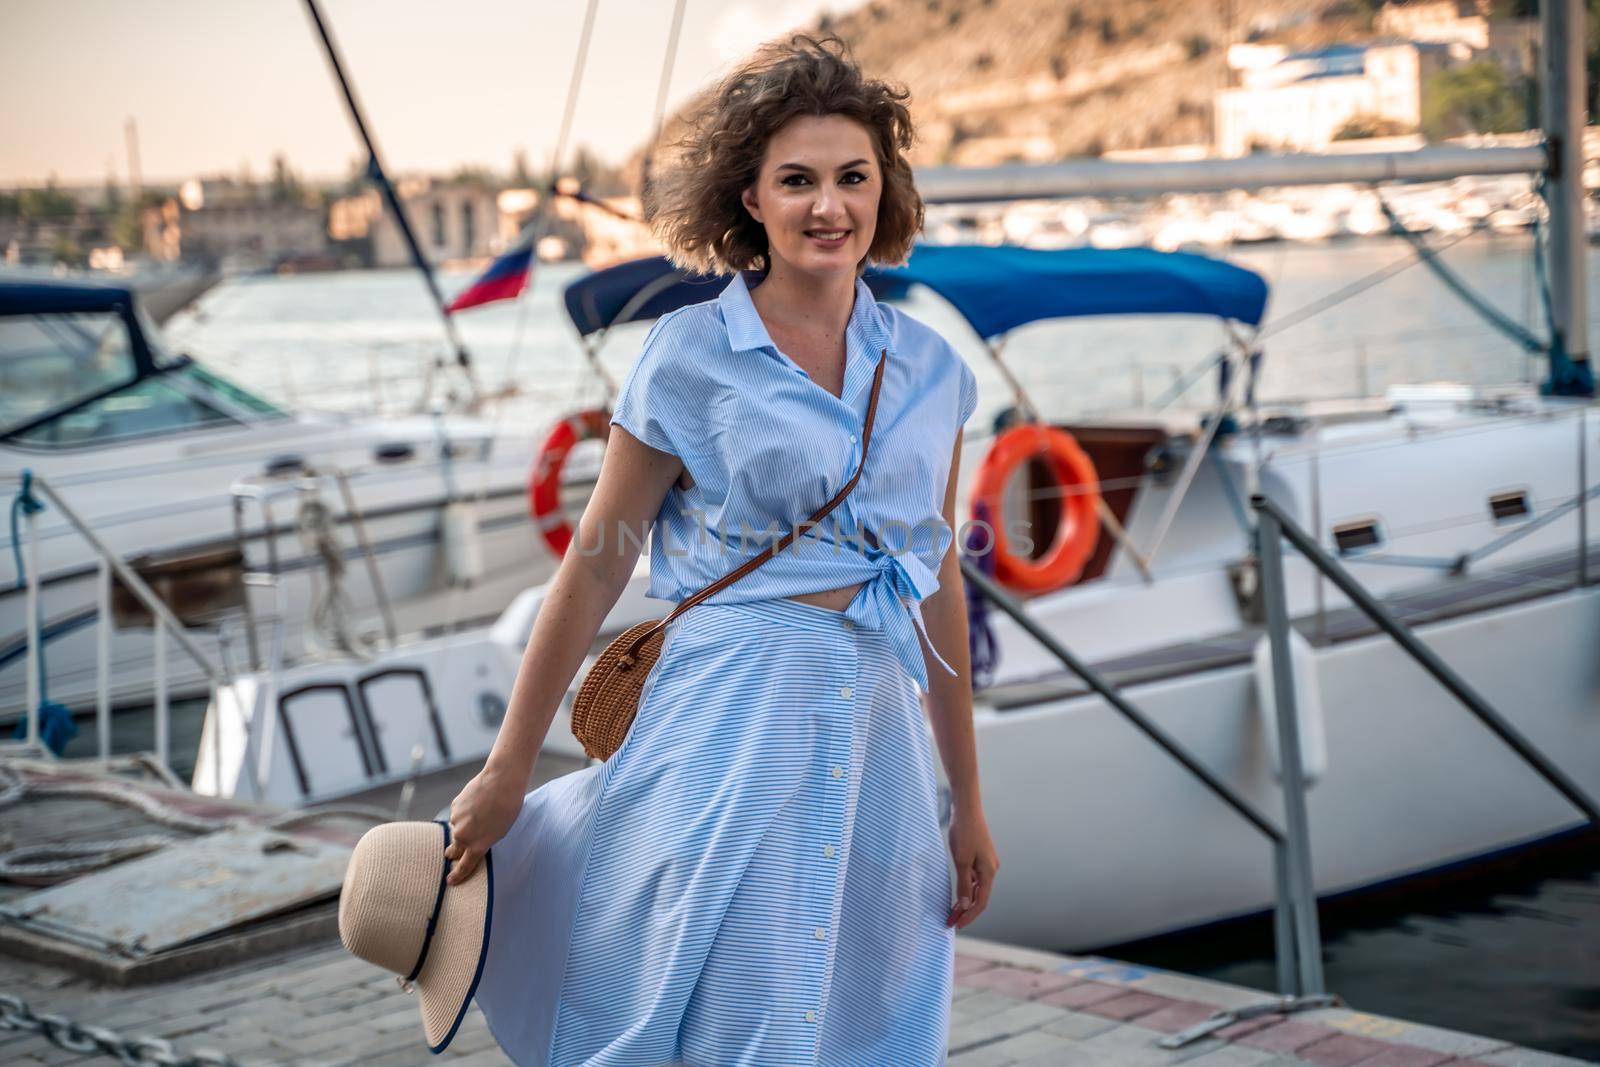 A young happy woman in a blue dress and hat stands near the seaport with luxury yachts. Travel and vacation concept.